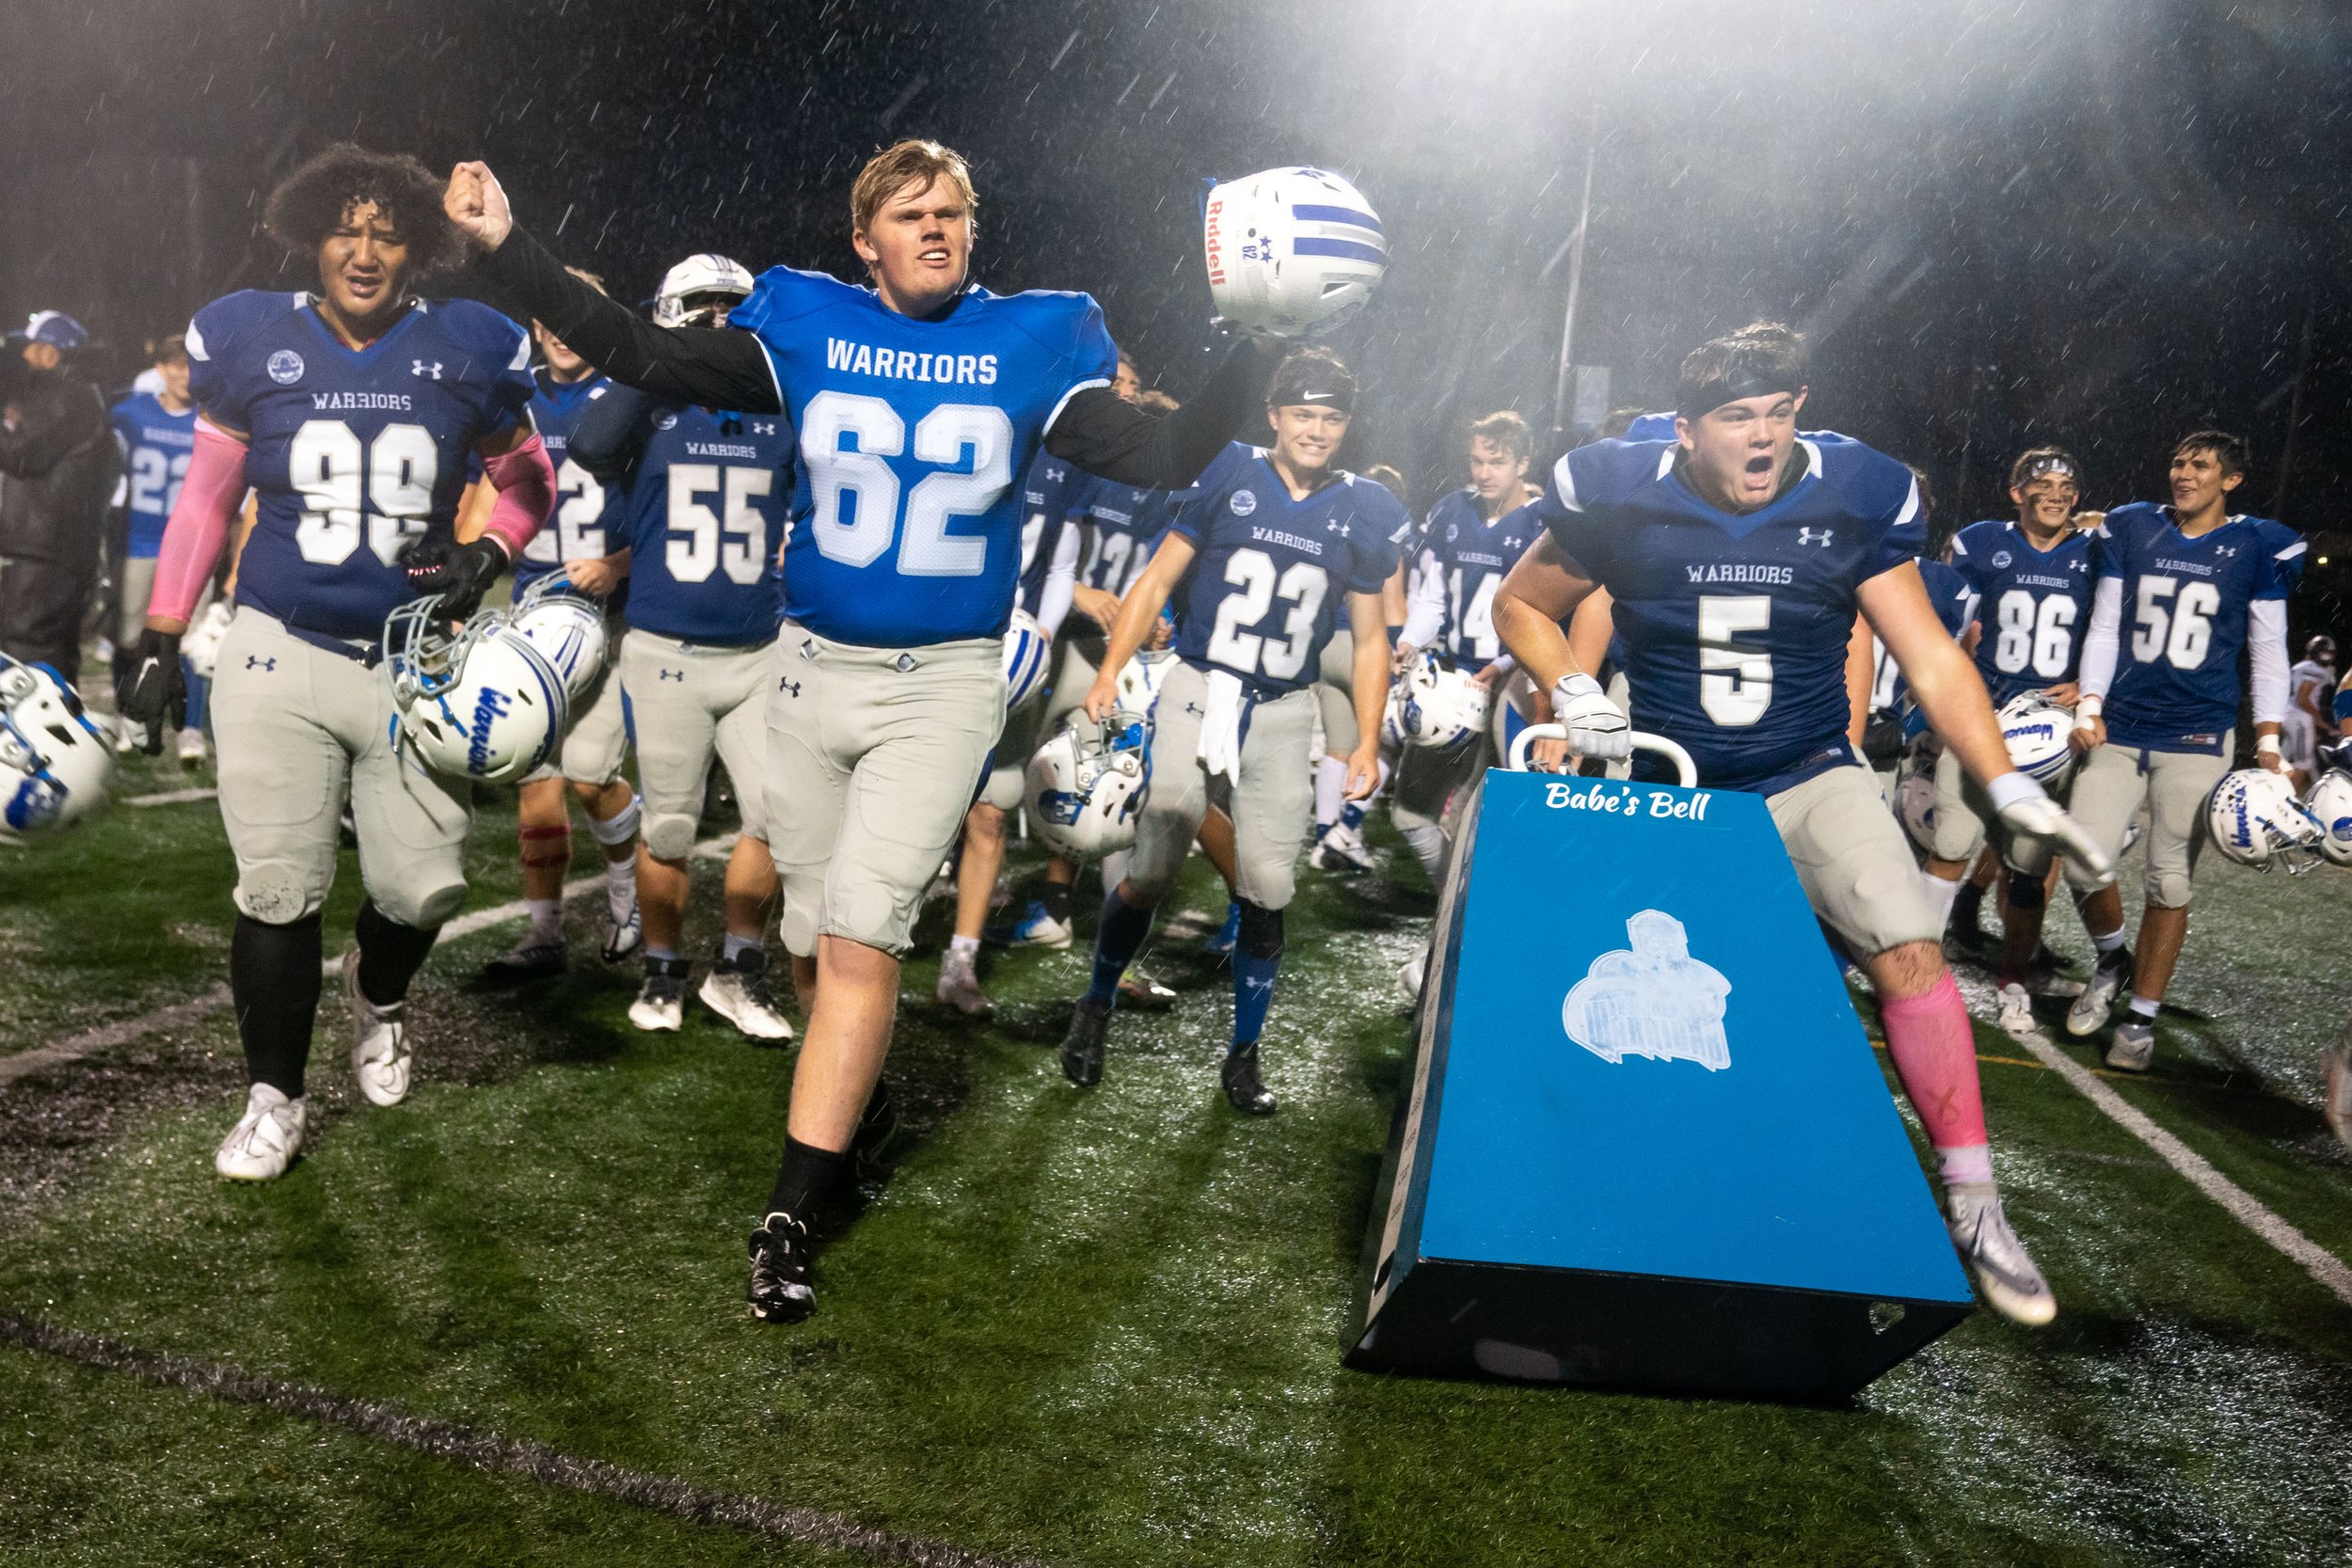  The Brainerd High School football team celebrates after winning their homecoming game against Bemidji Sept. 23, 2022 in Brainerd, Minn. Brainerd and Bemidji compete every year to win “Babe’s Bell,” a traveling trophy. This is the first time Brainerd